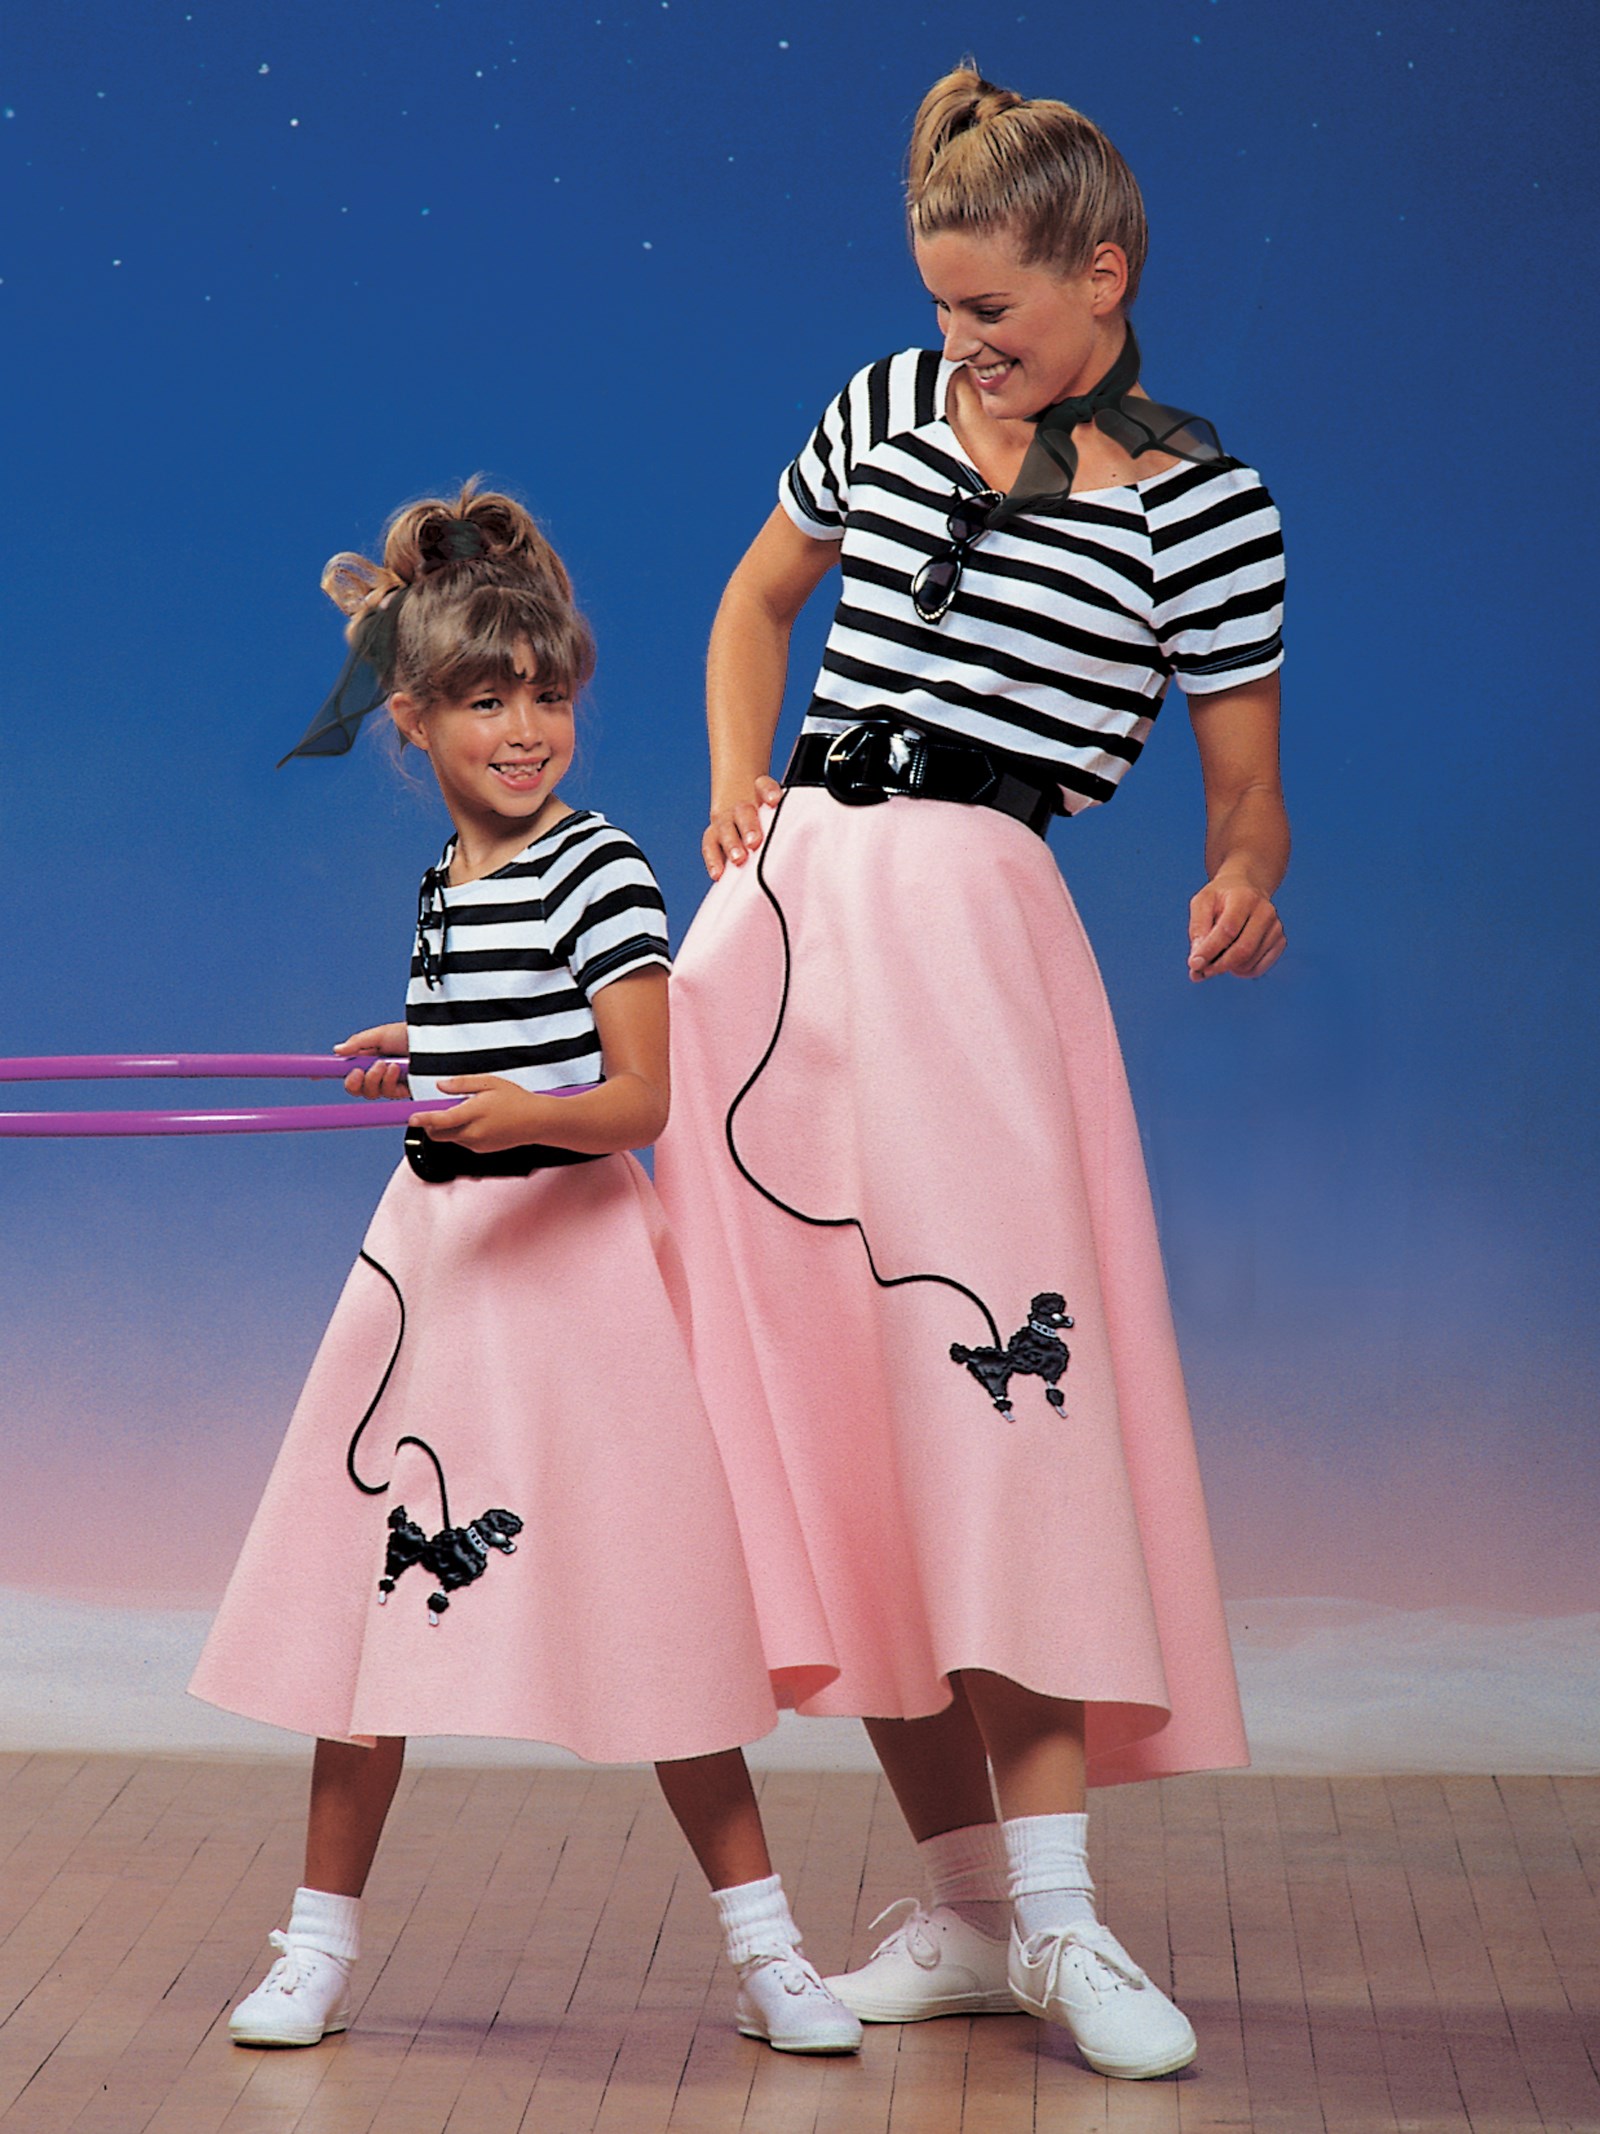 1950s Poodle Skirt Child Costume